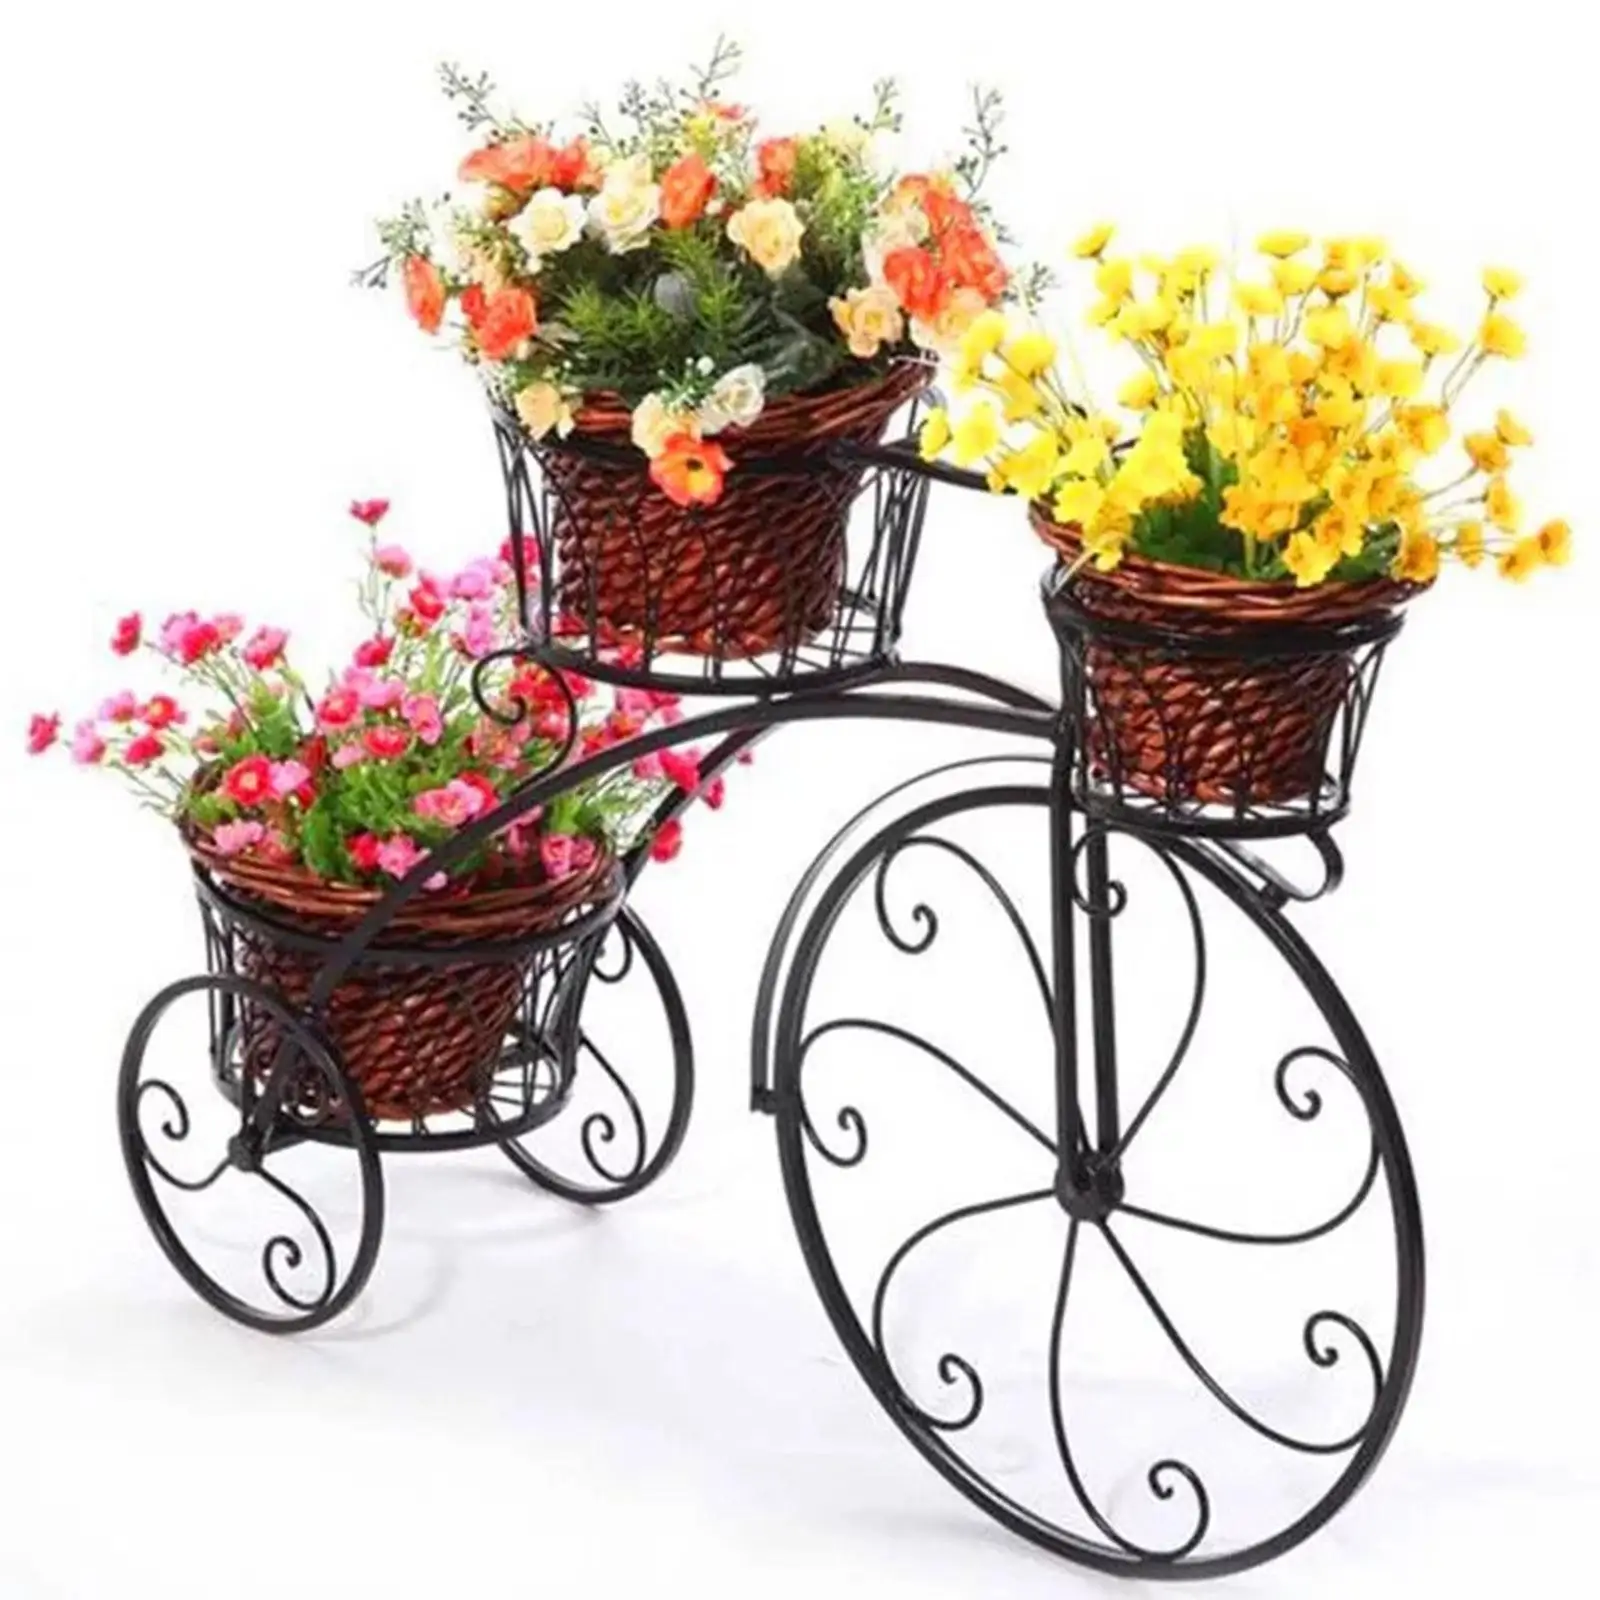 Creative Bicycle Flower Basket Bookshelf Multipurpose Decorative Storage Shelf Unique Bicycle Plant Stand for Living Room Home